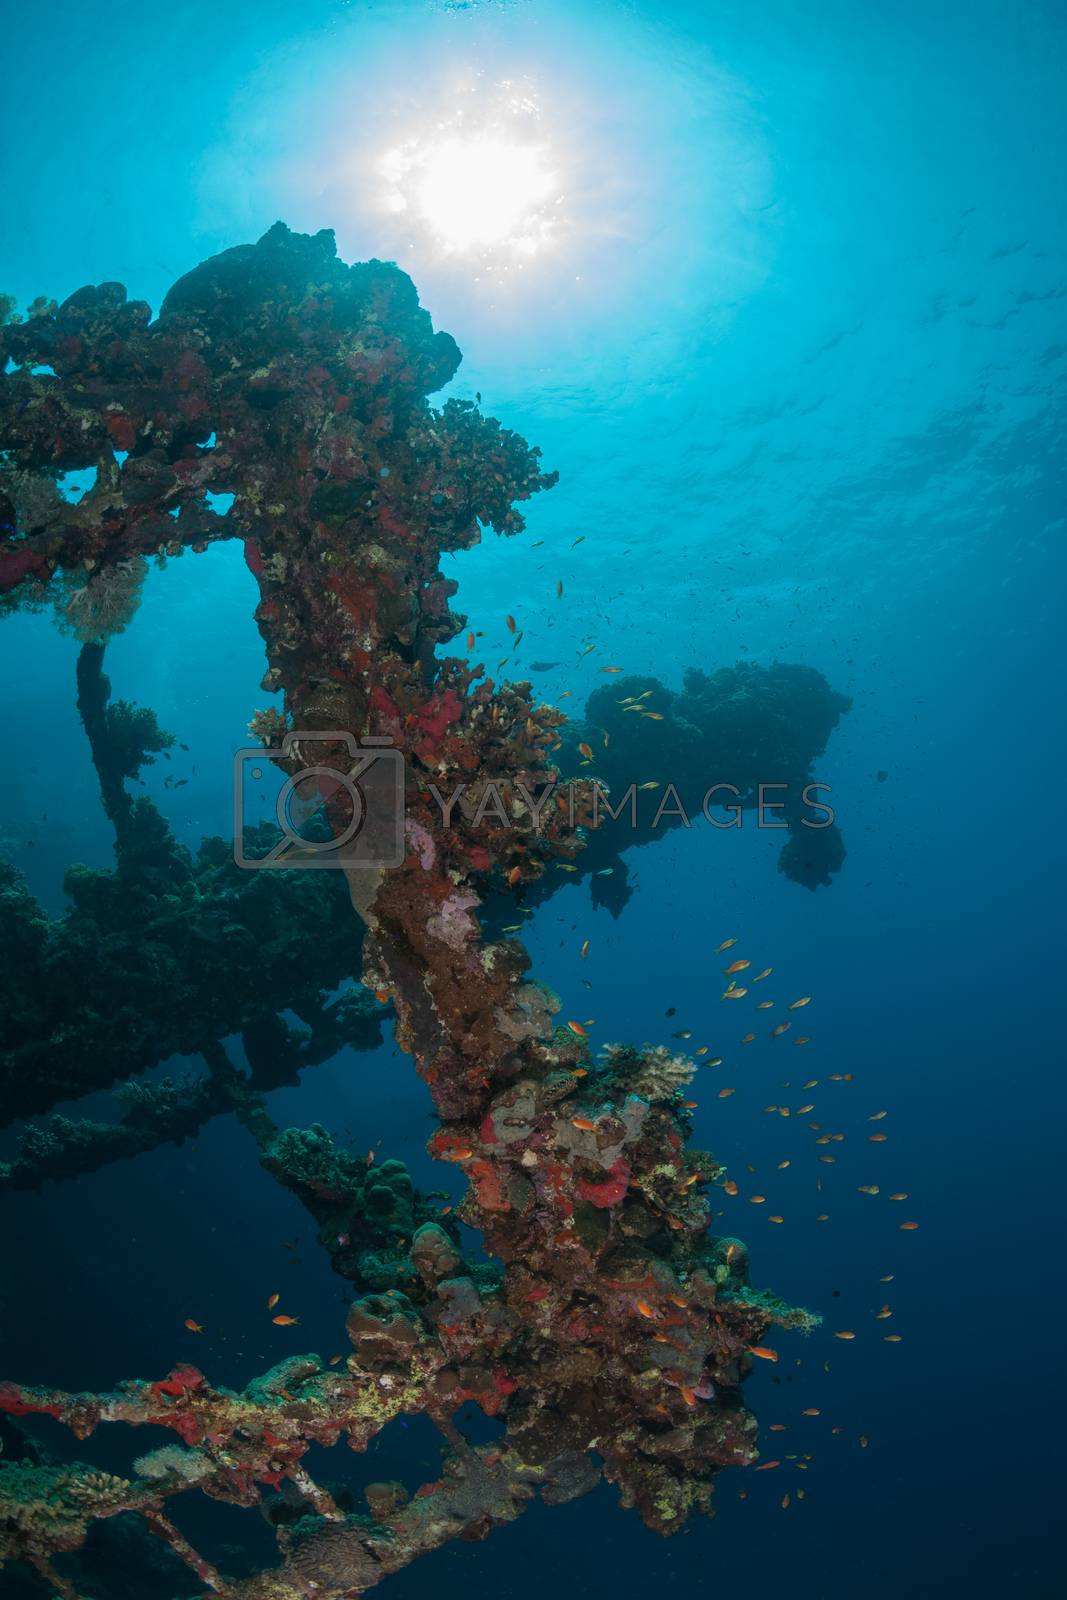 Royalty free image of sunken ship wreck underwater diving Sudan Red Sea by desant7474